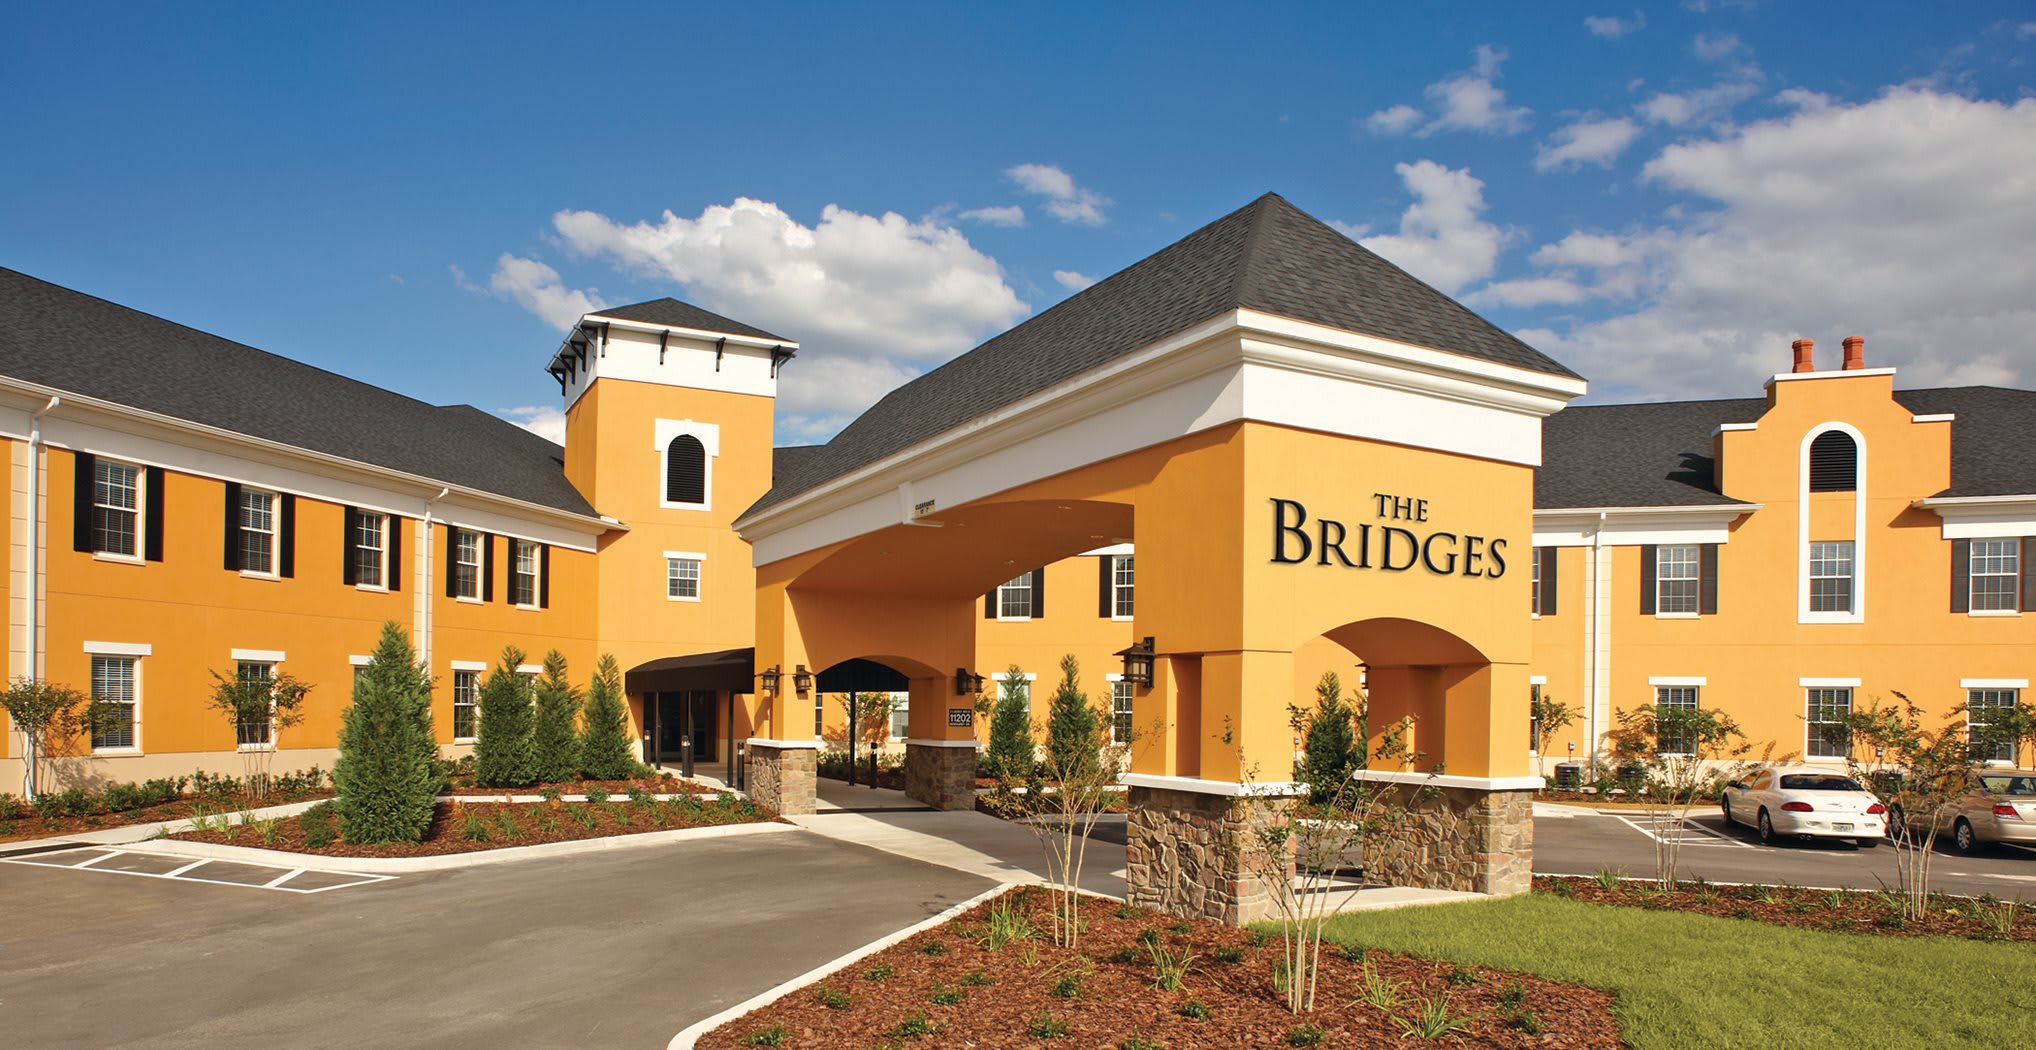 The Bridges Assisted Living and Memory Care Community